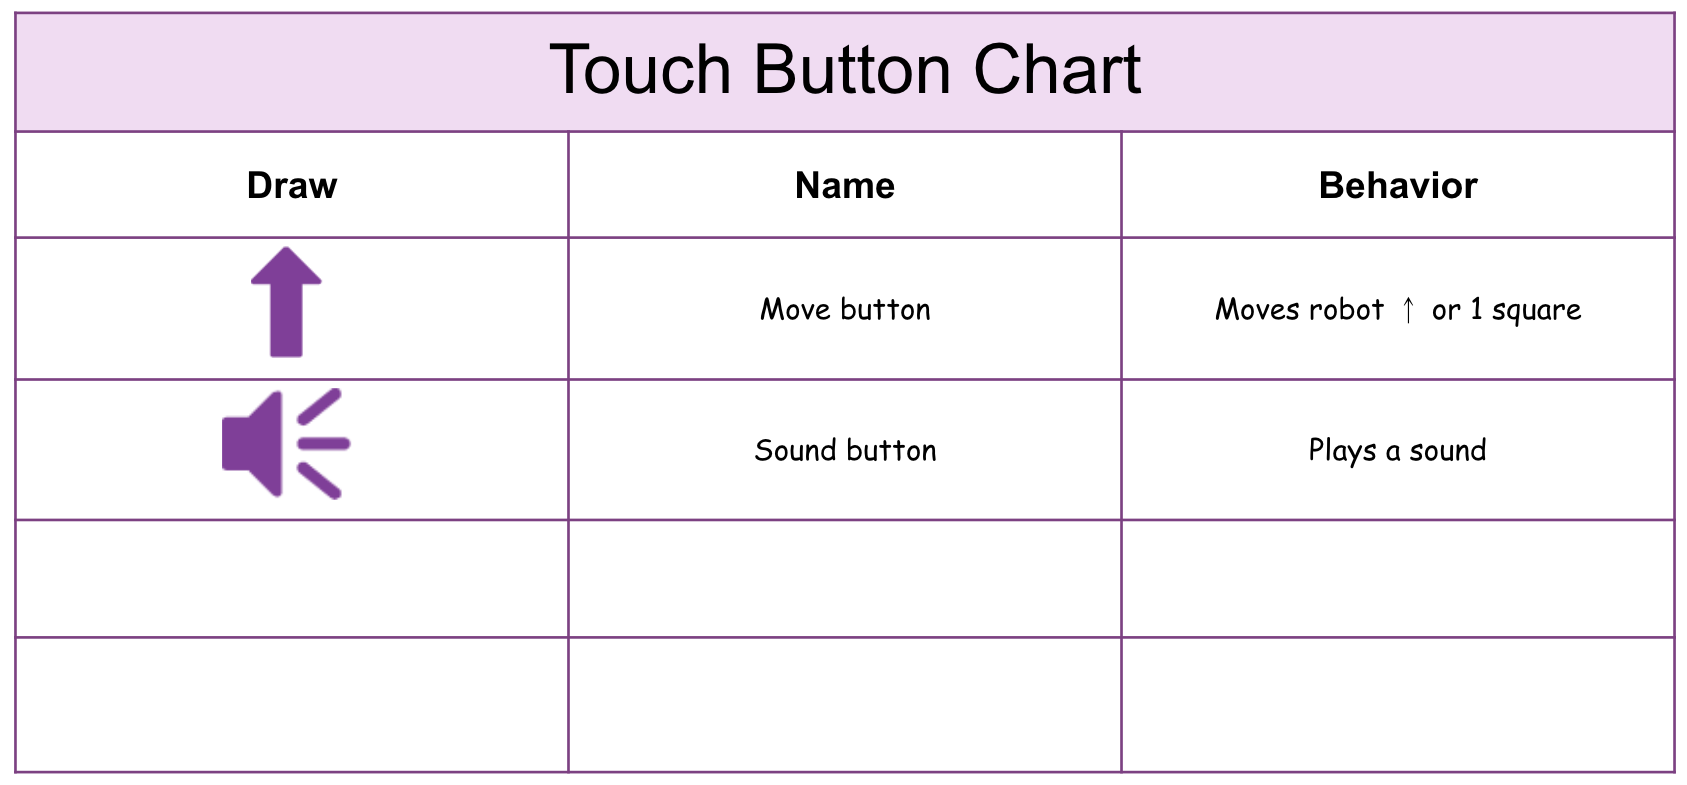 image of an example of how to set up a touch button chart